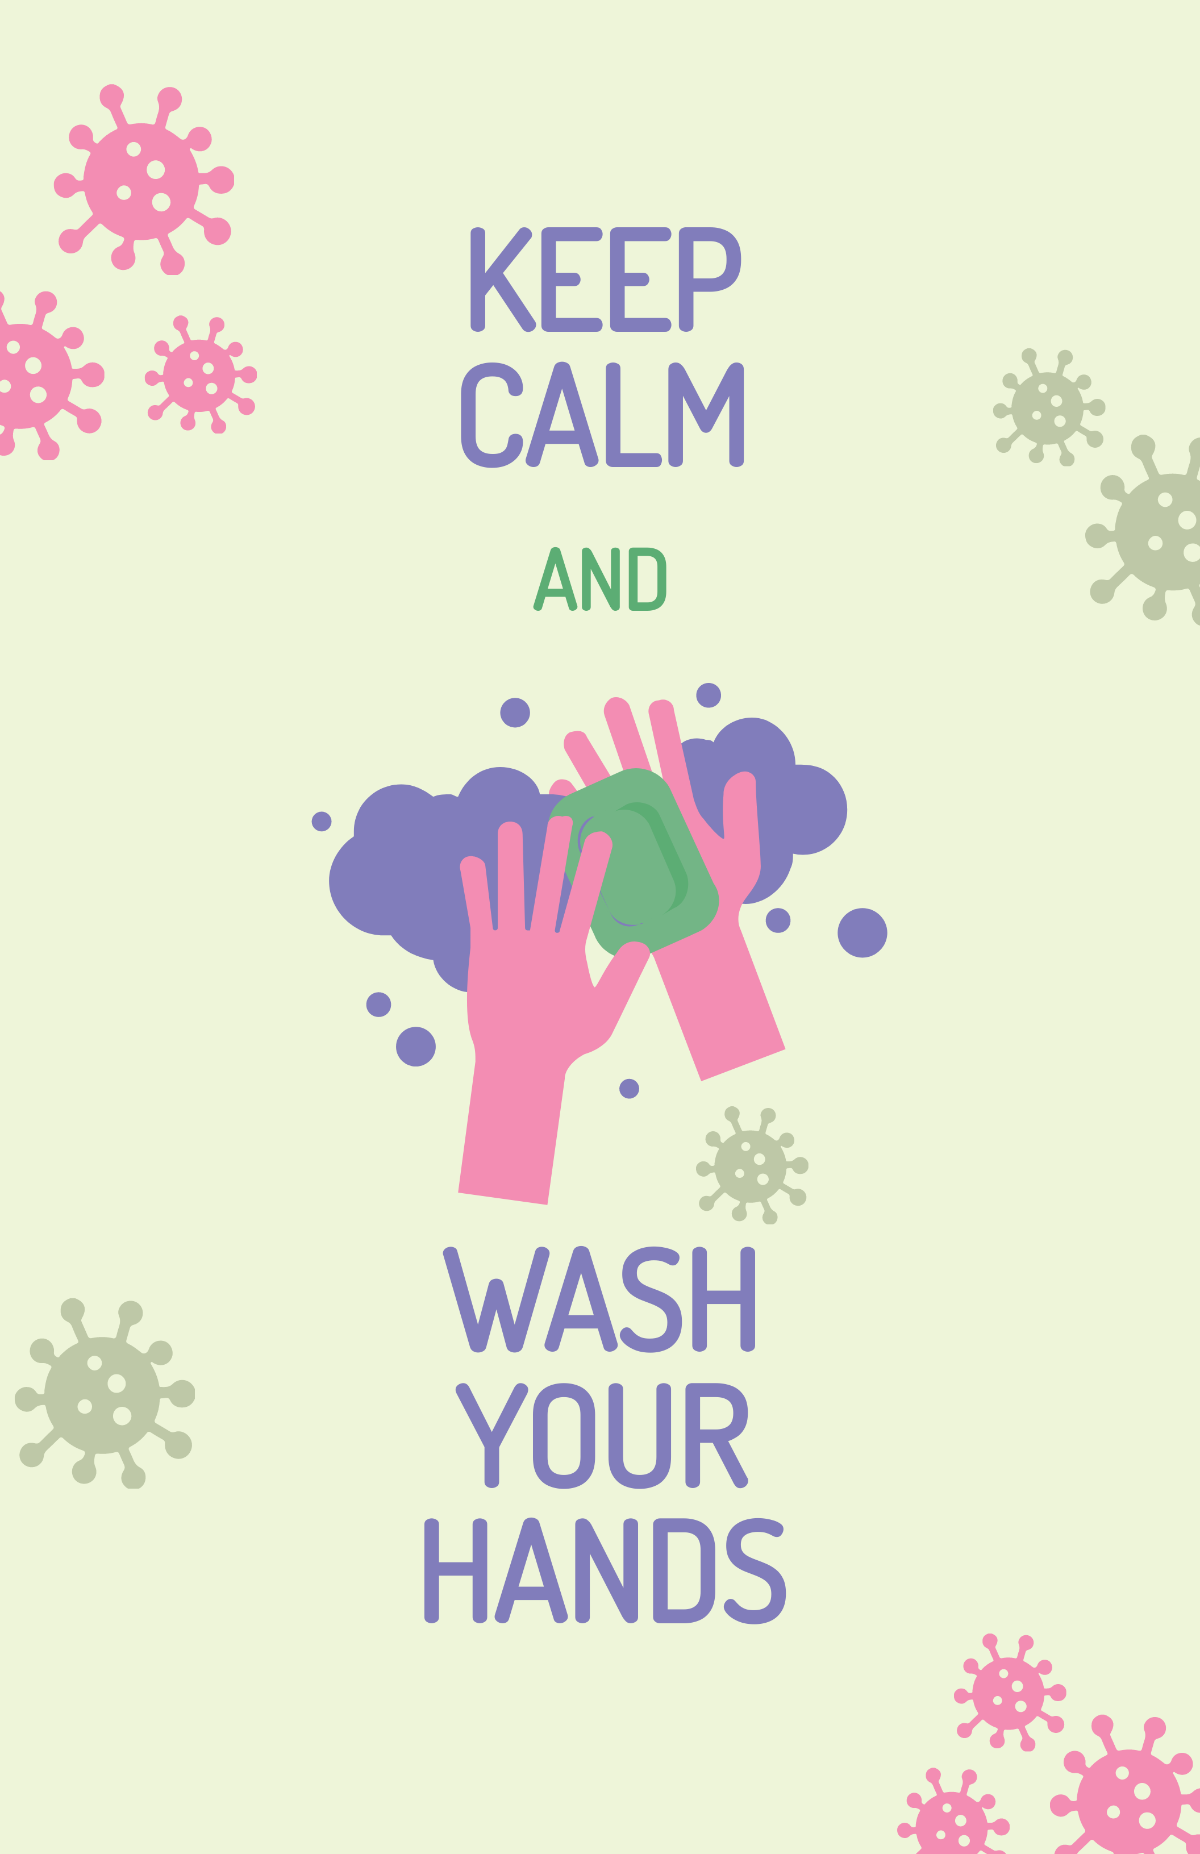 Keep Calm And Wash Your Hands Poster Template